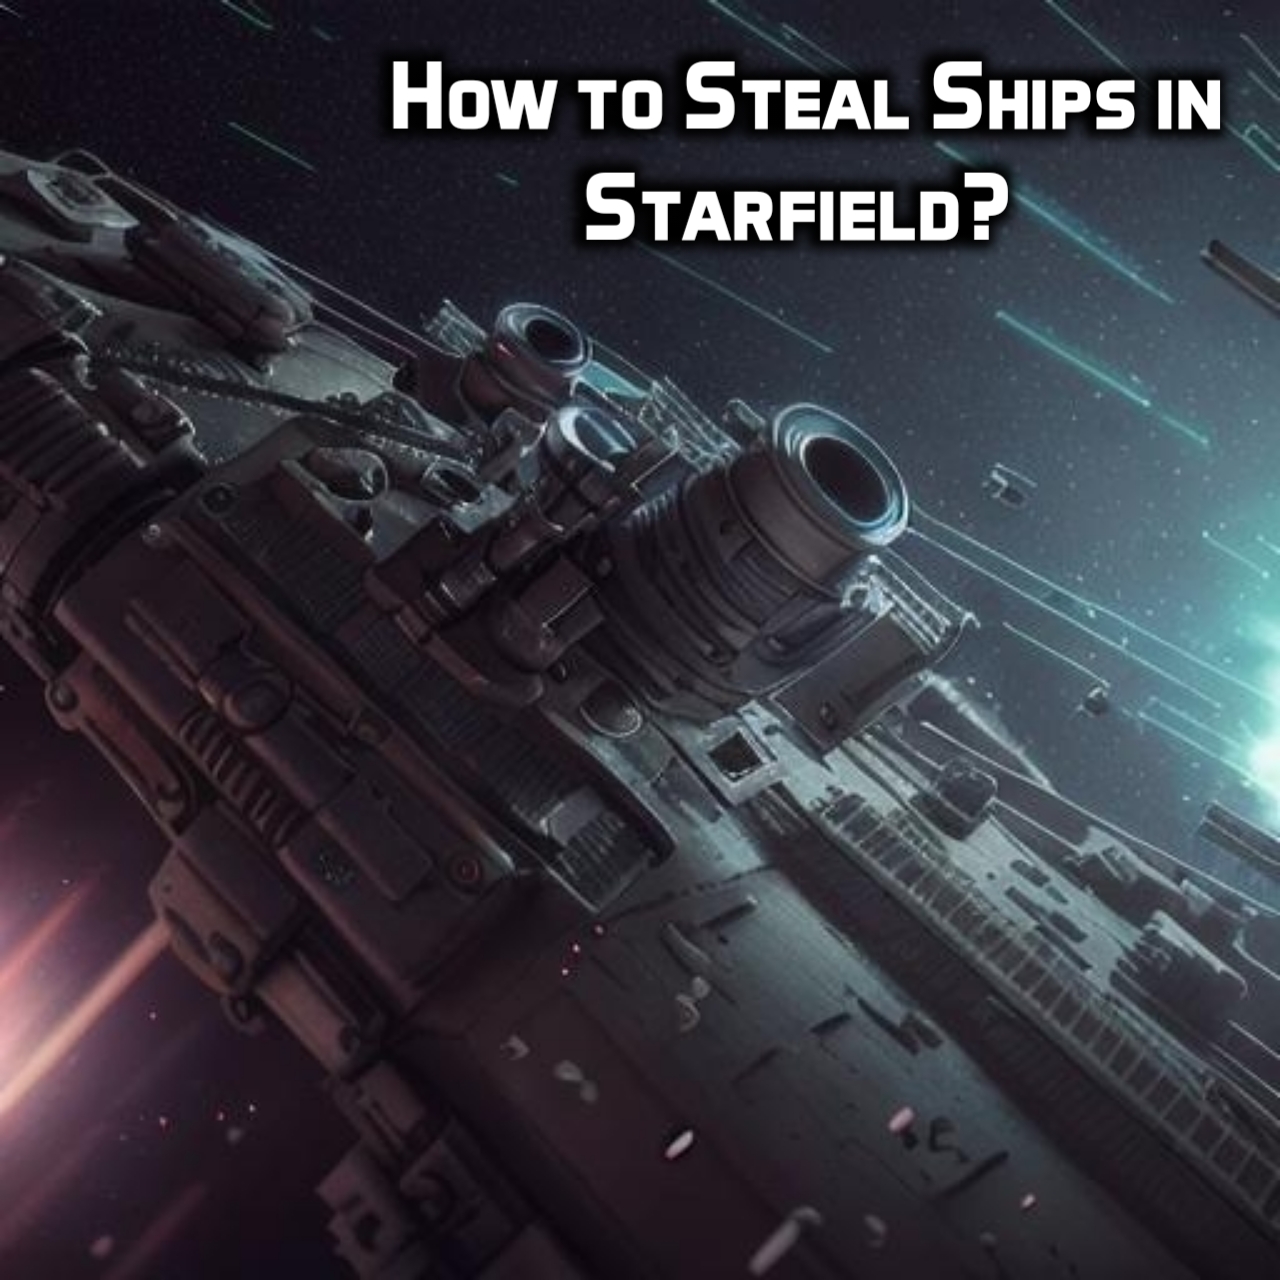 How to Steal Ships in Starfield